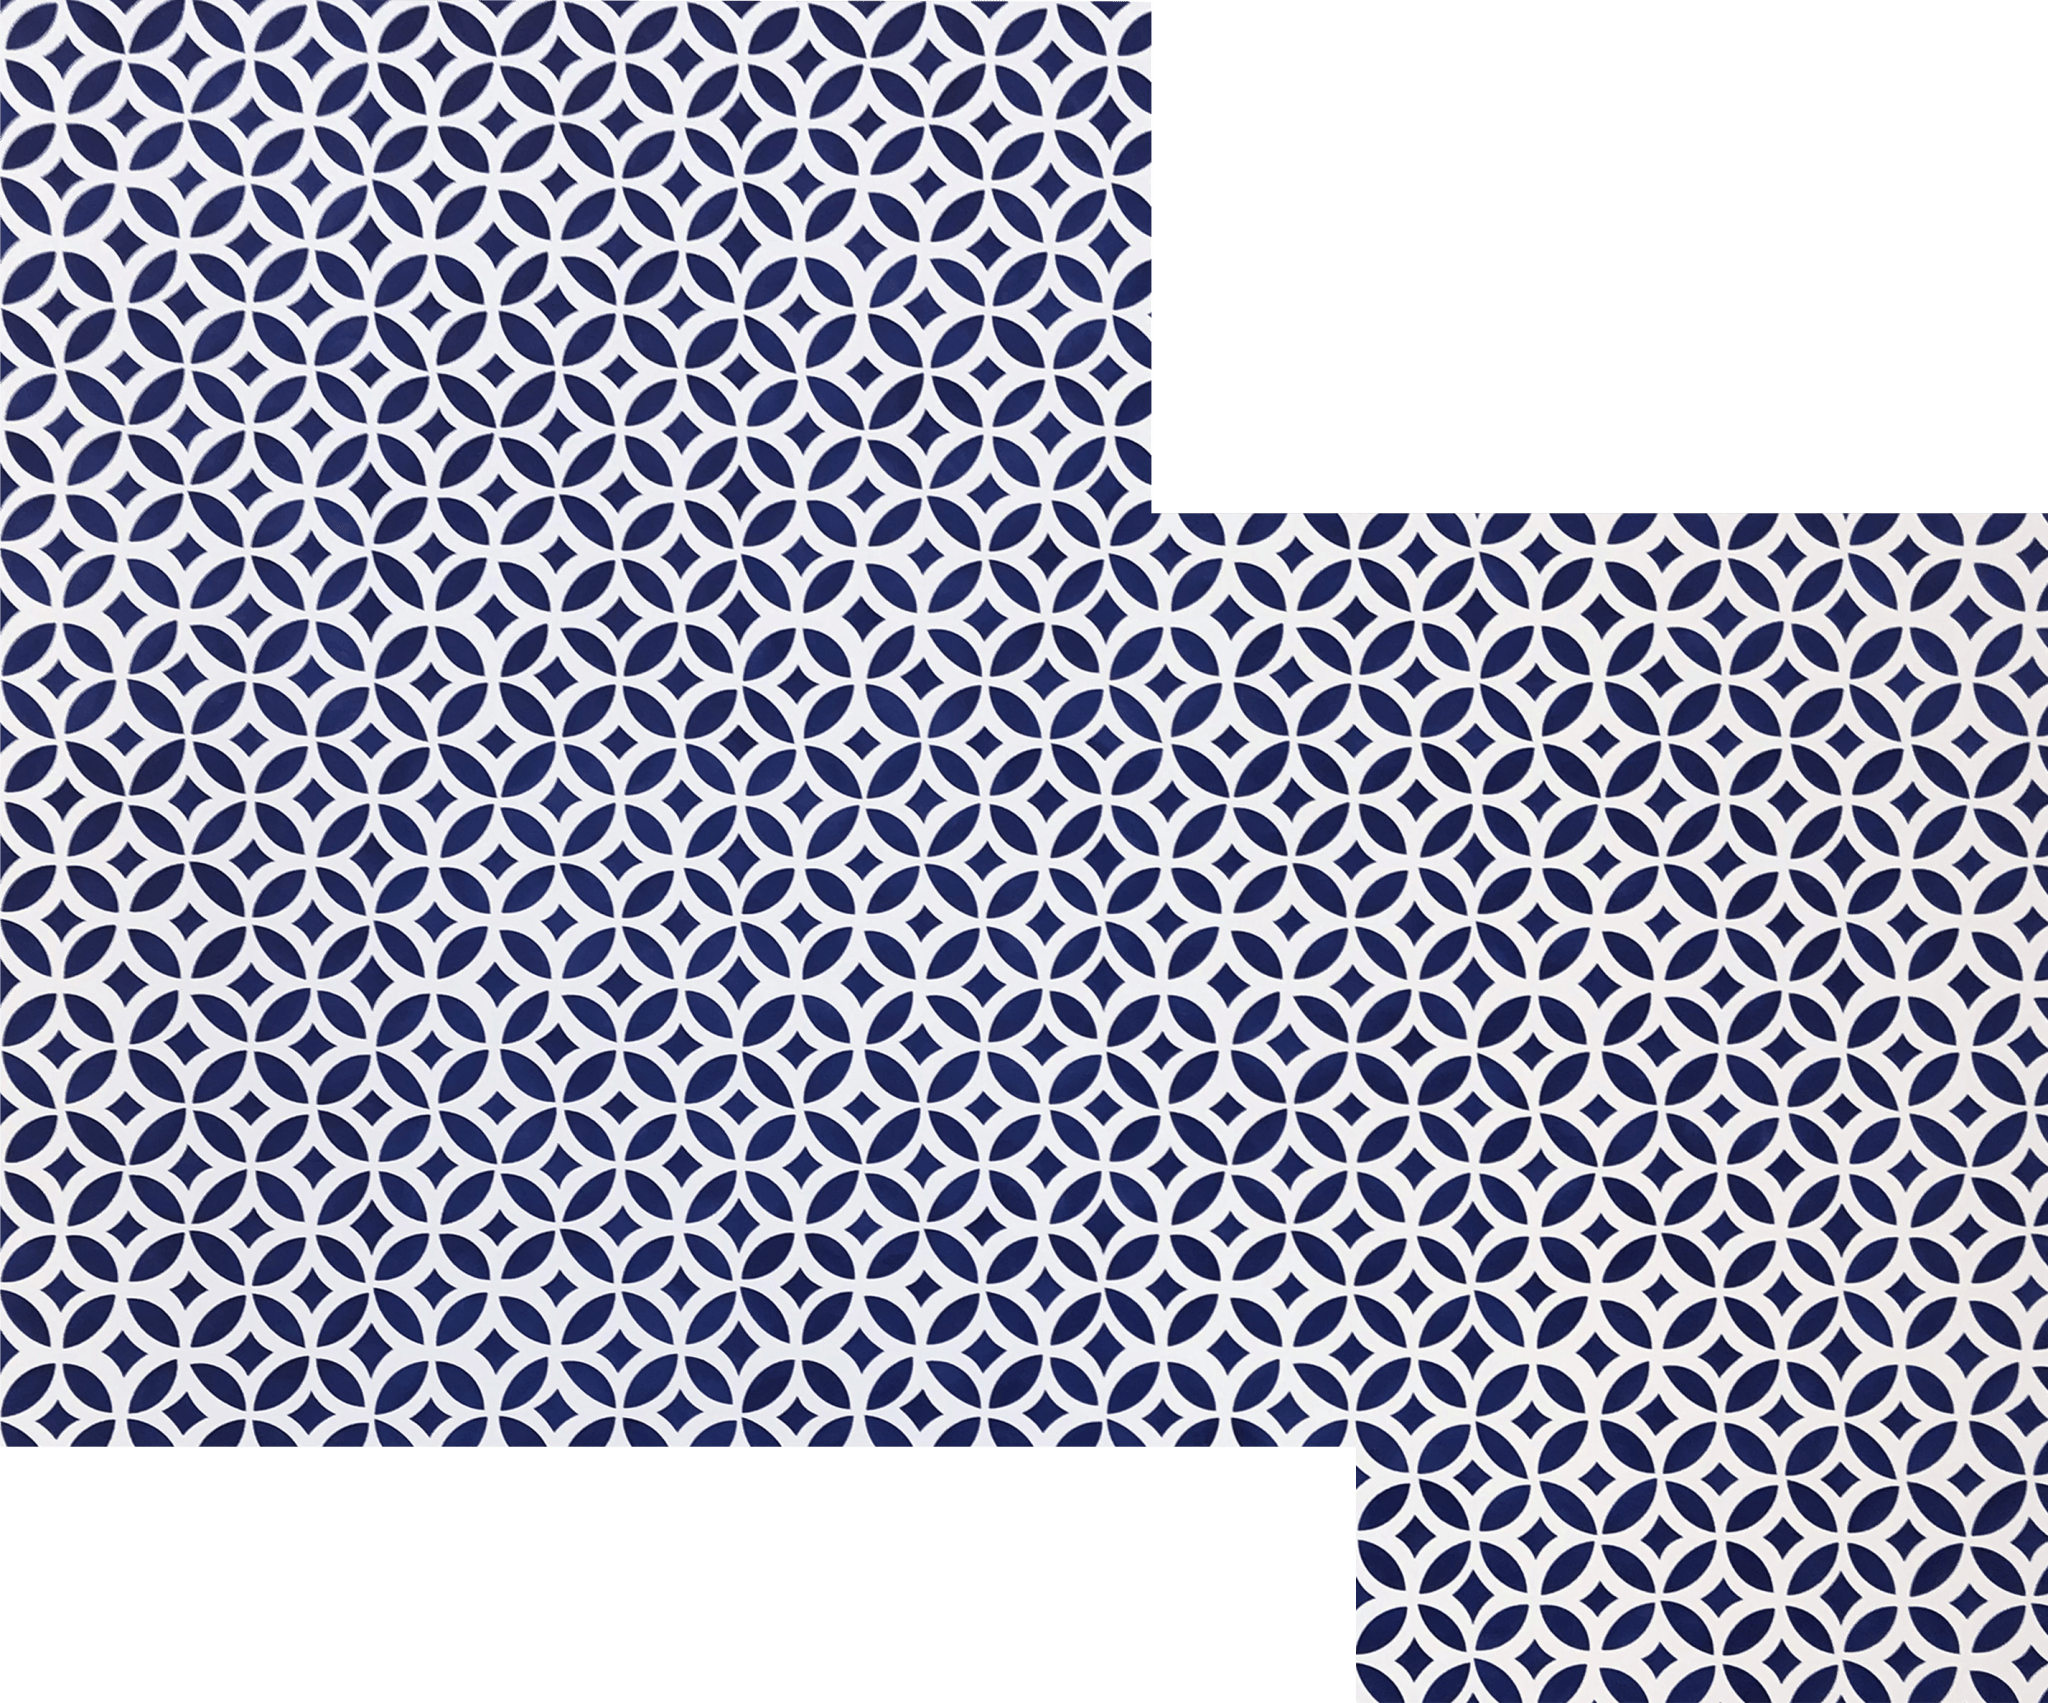 Full image of this shaped piece made to perfectly fit the footprint of the bathroom.  The pattern is a interlocking circle design.